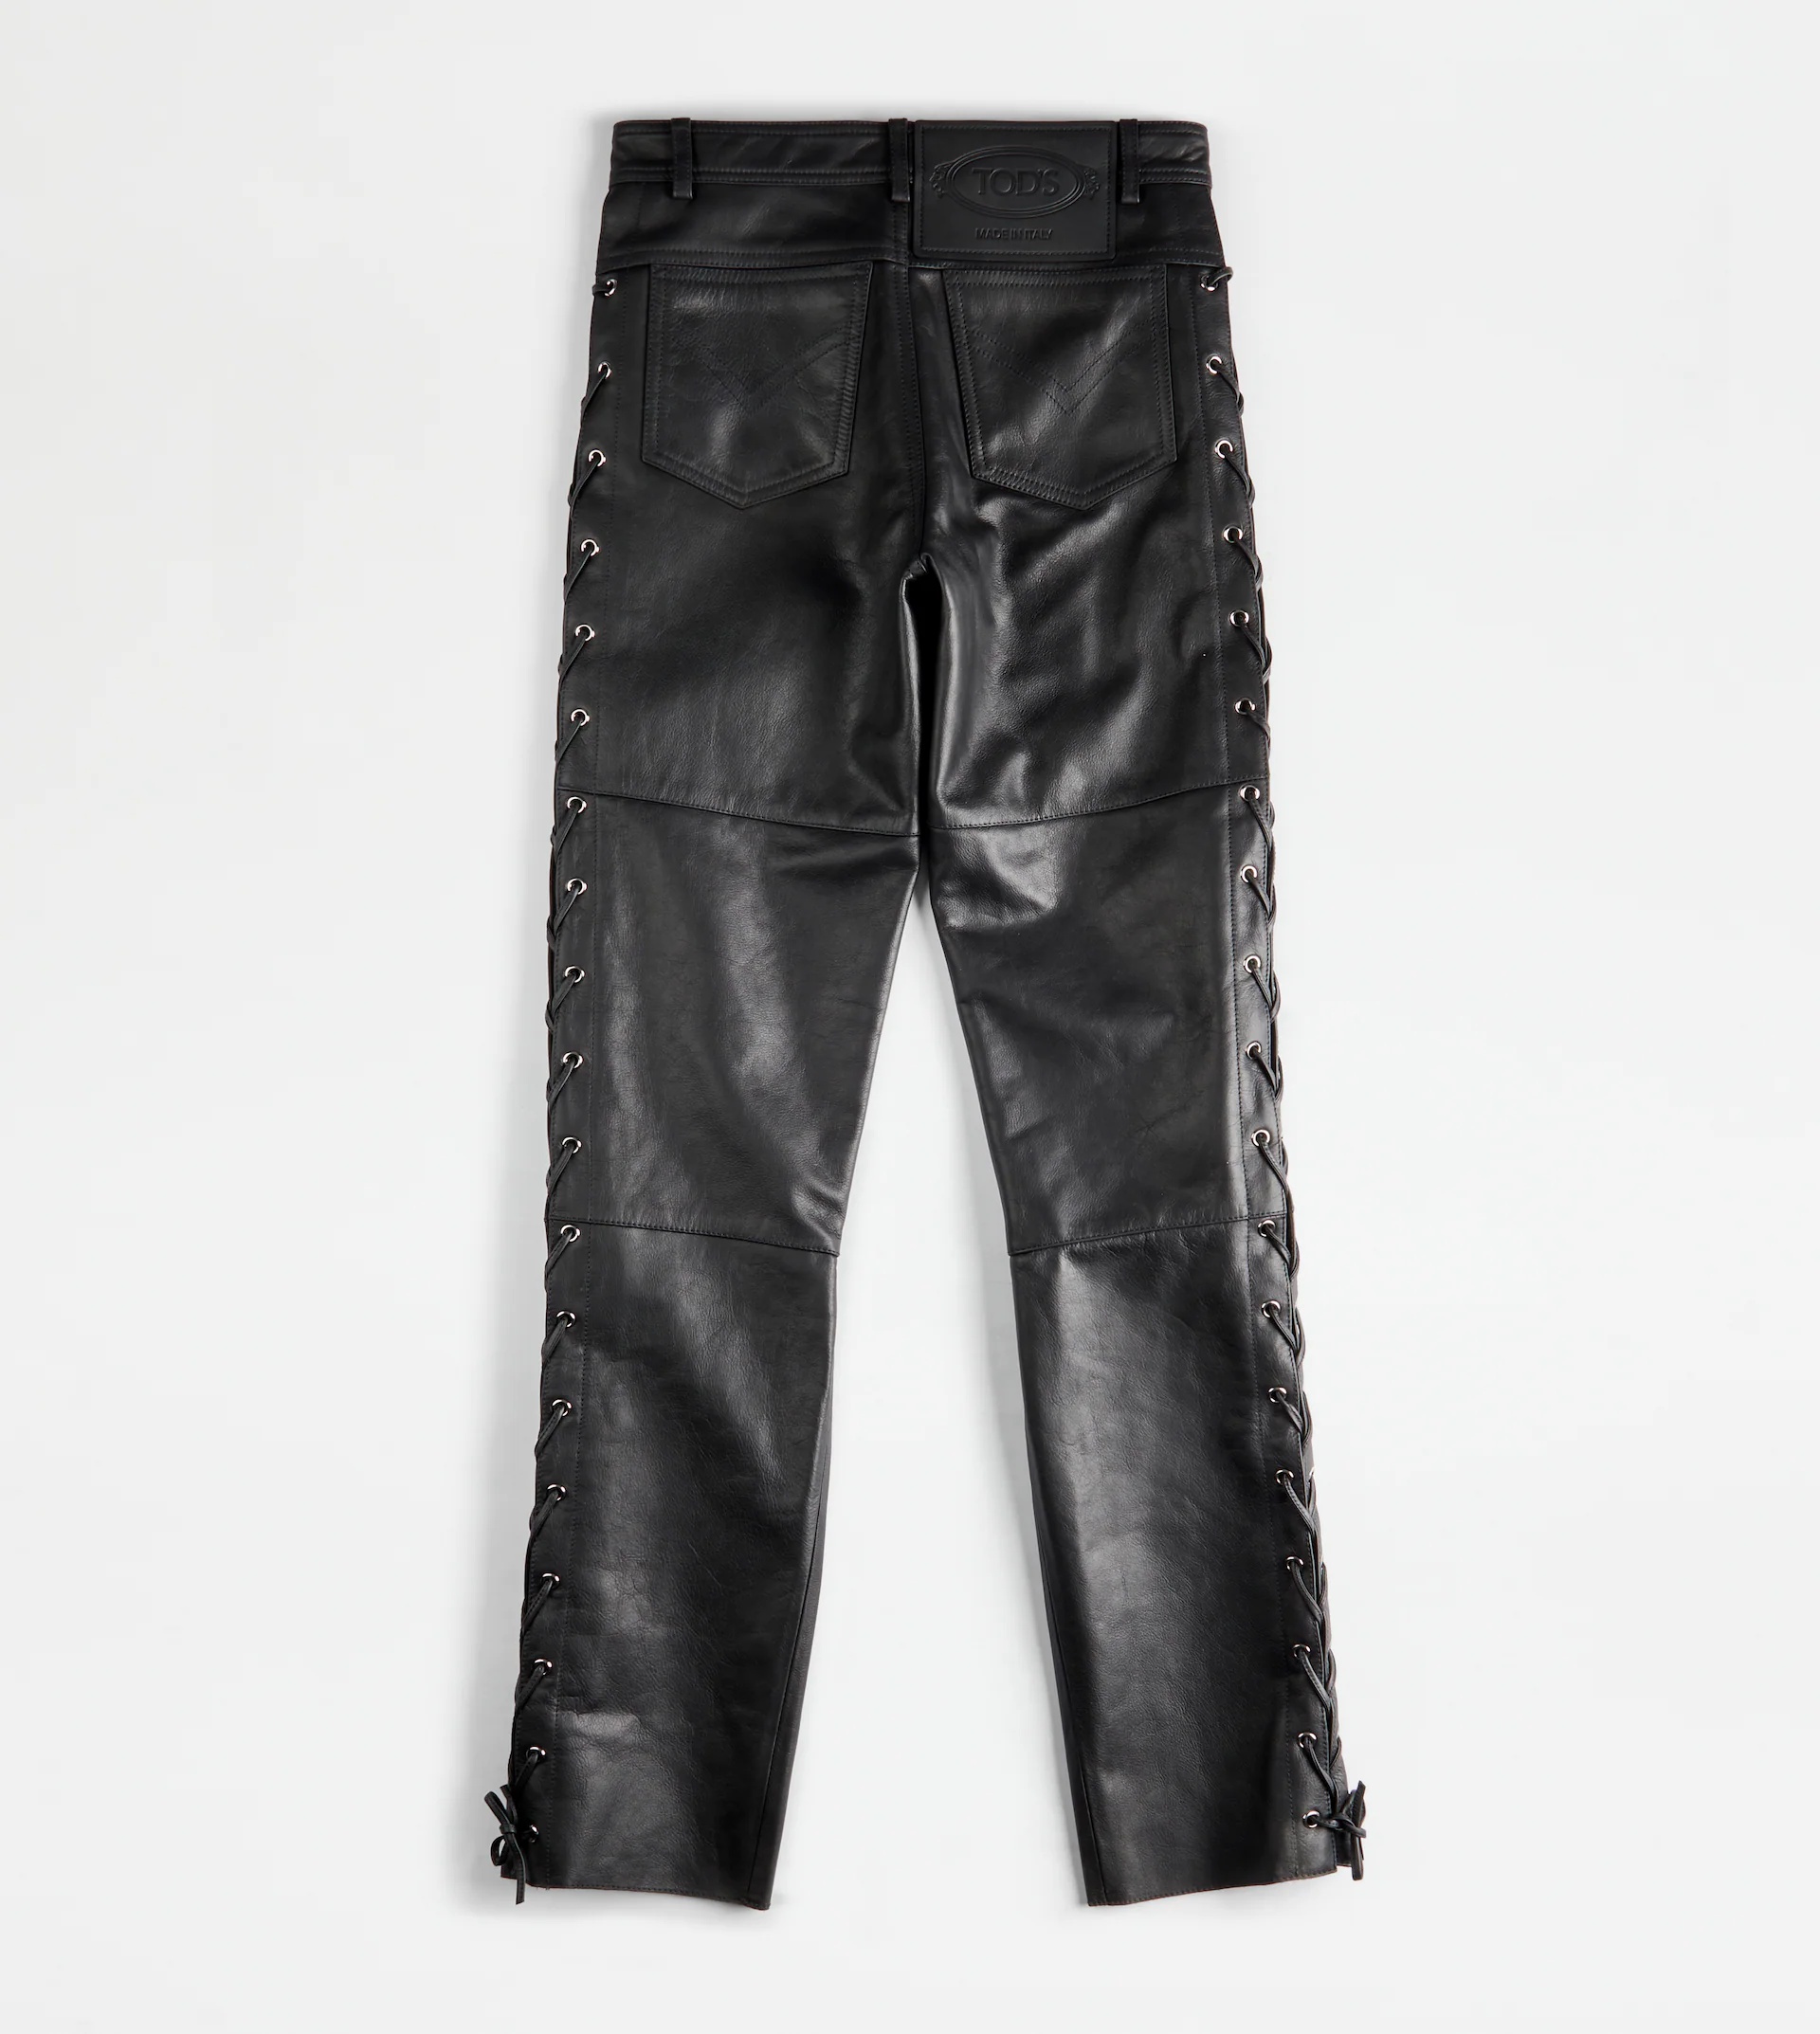 TOD'S TROUSERS IN LEATHER - BLACK - 8